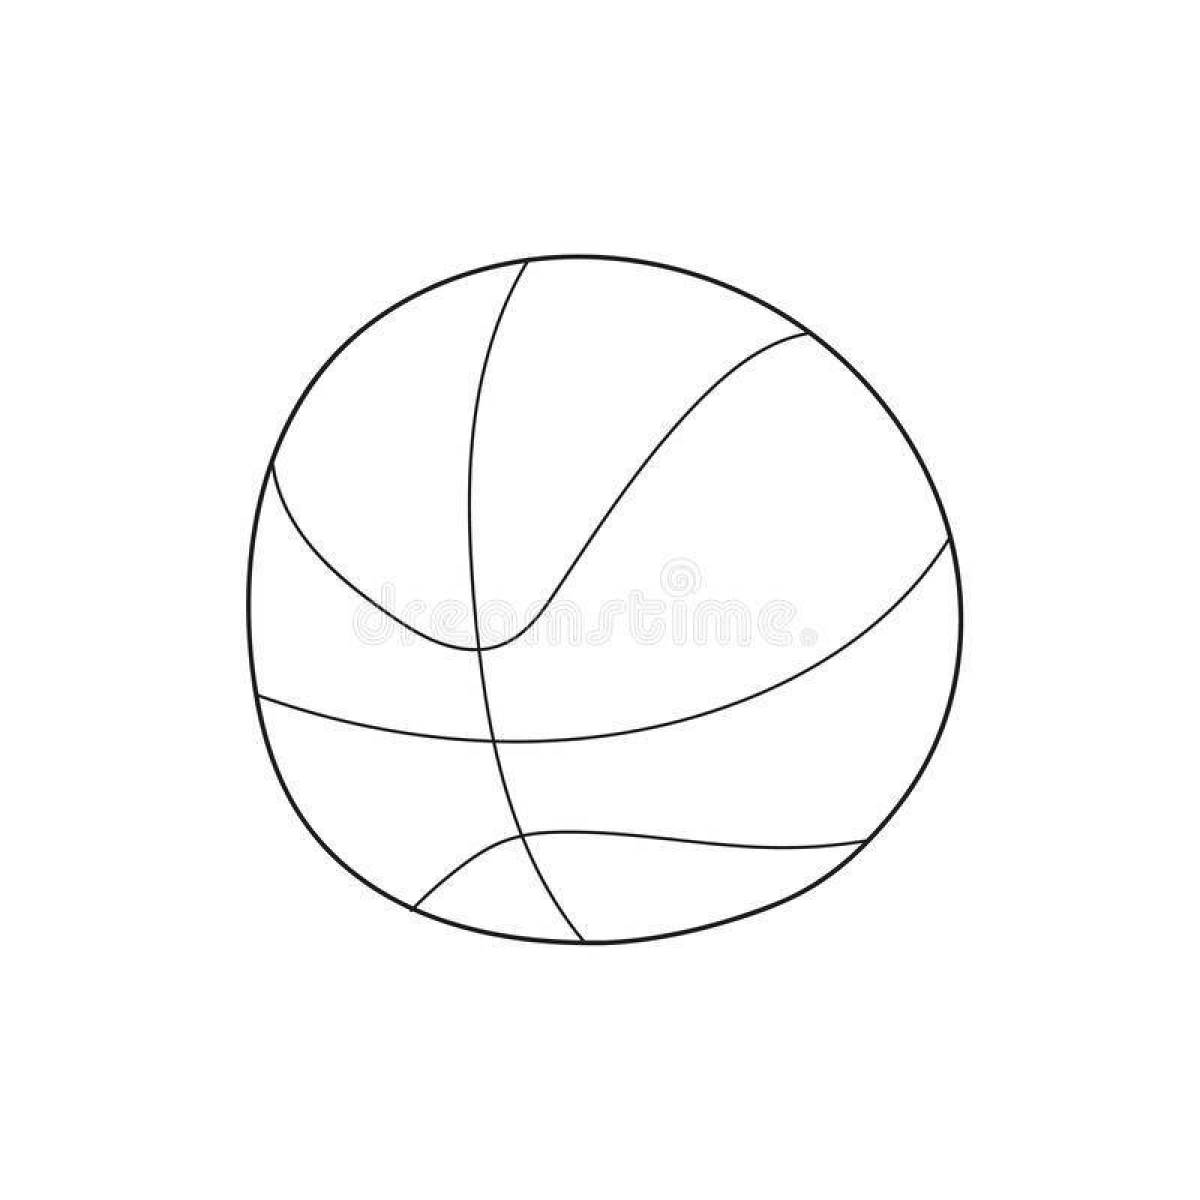 Colorful basketball coloring page